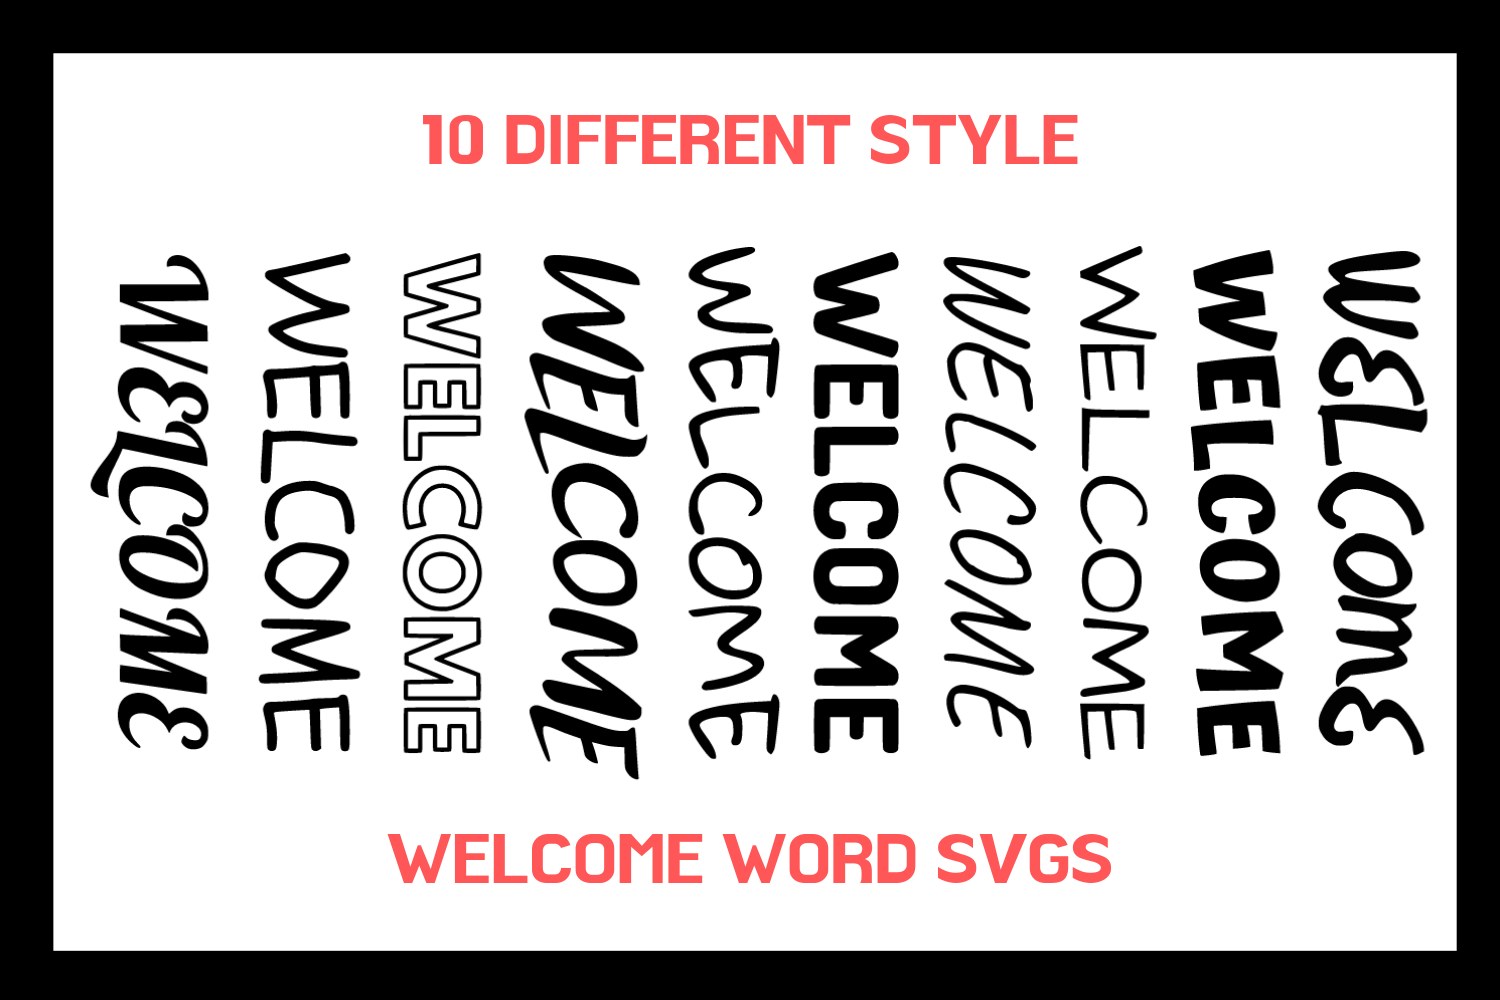 ori 3602612 dsuwtjrz8othdxq55eav3gt1m4q988n2o131zhju 10 different style welcome svgs for crafters